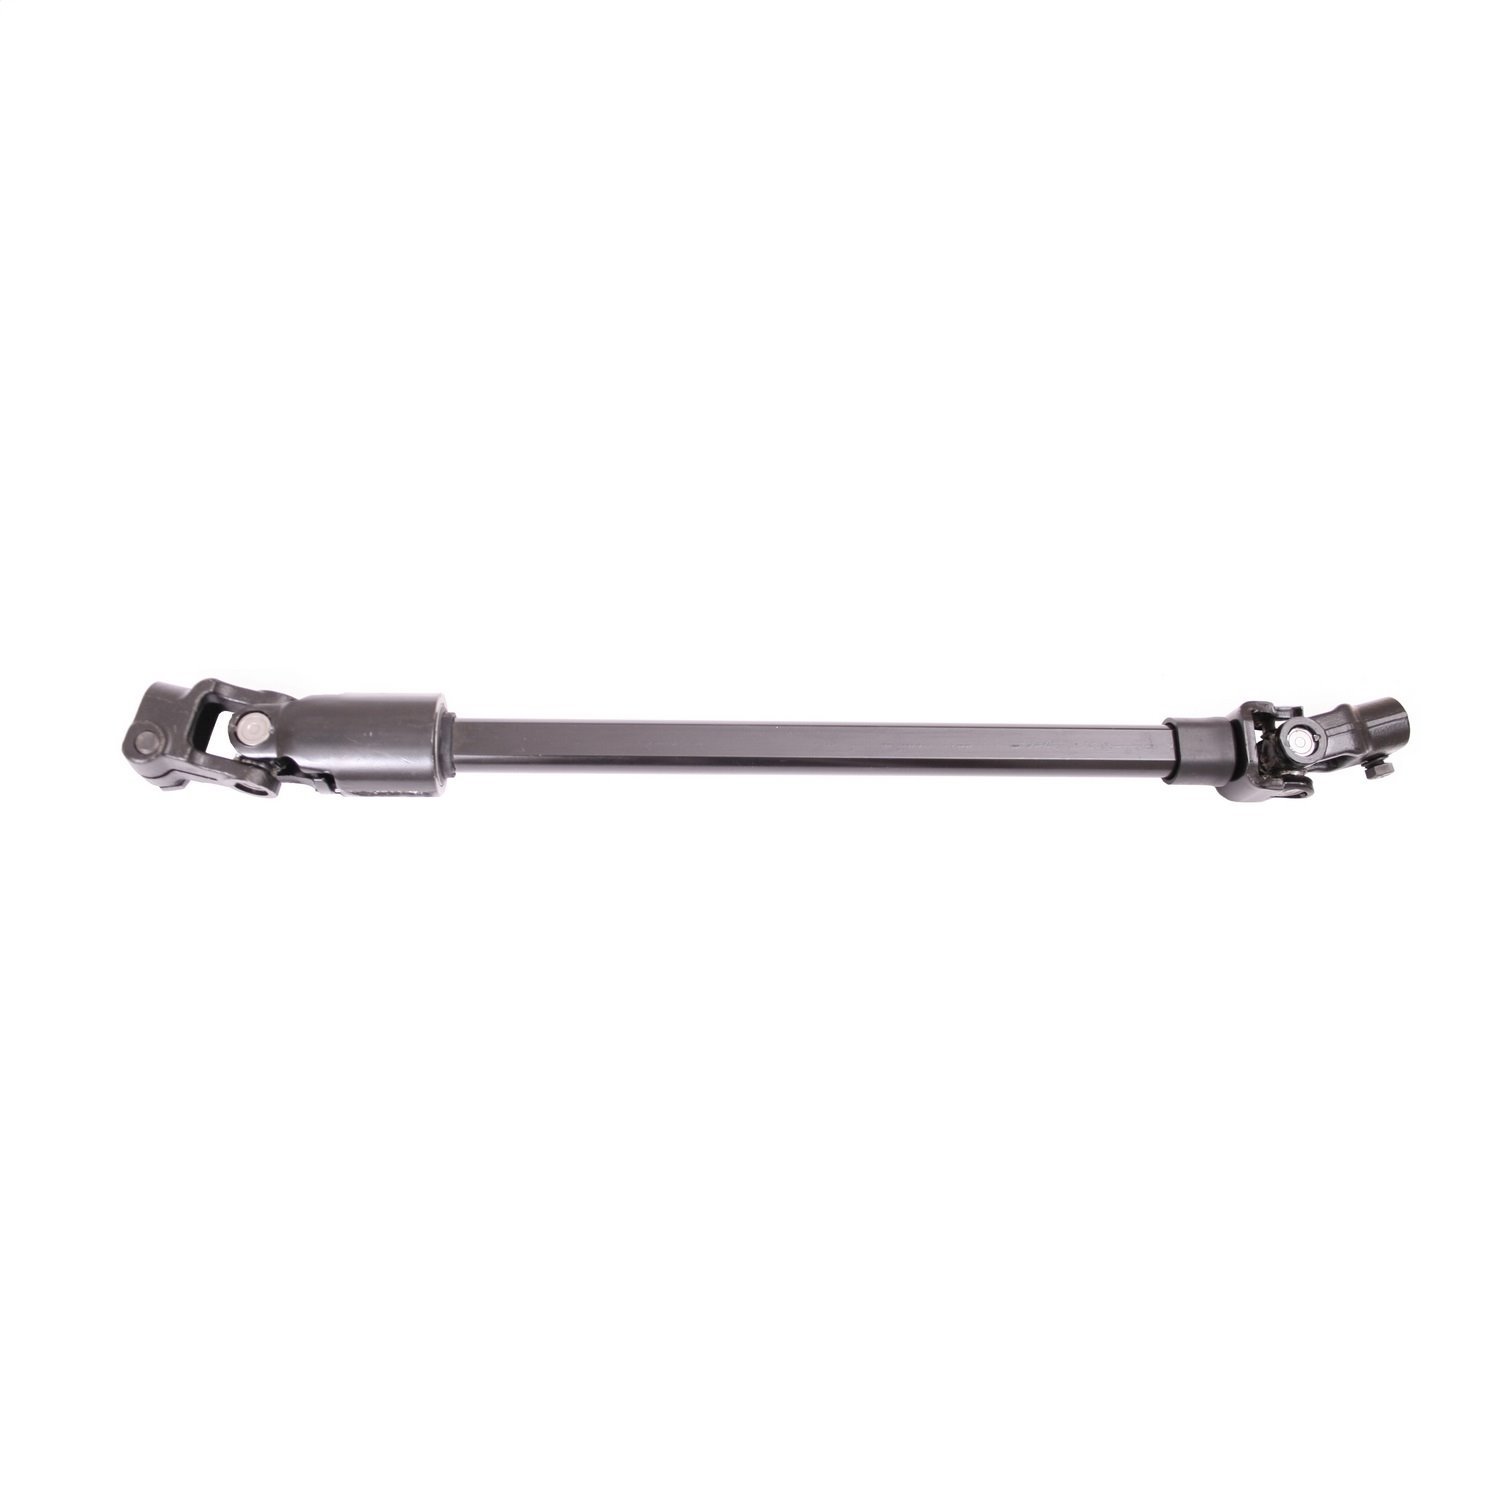 Factory-style replacement lower power steering shaft from Omix-ADA, Fits 87-95 Jeep Wrangler YJ